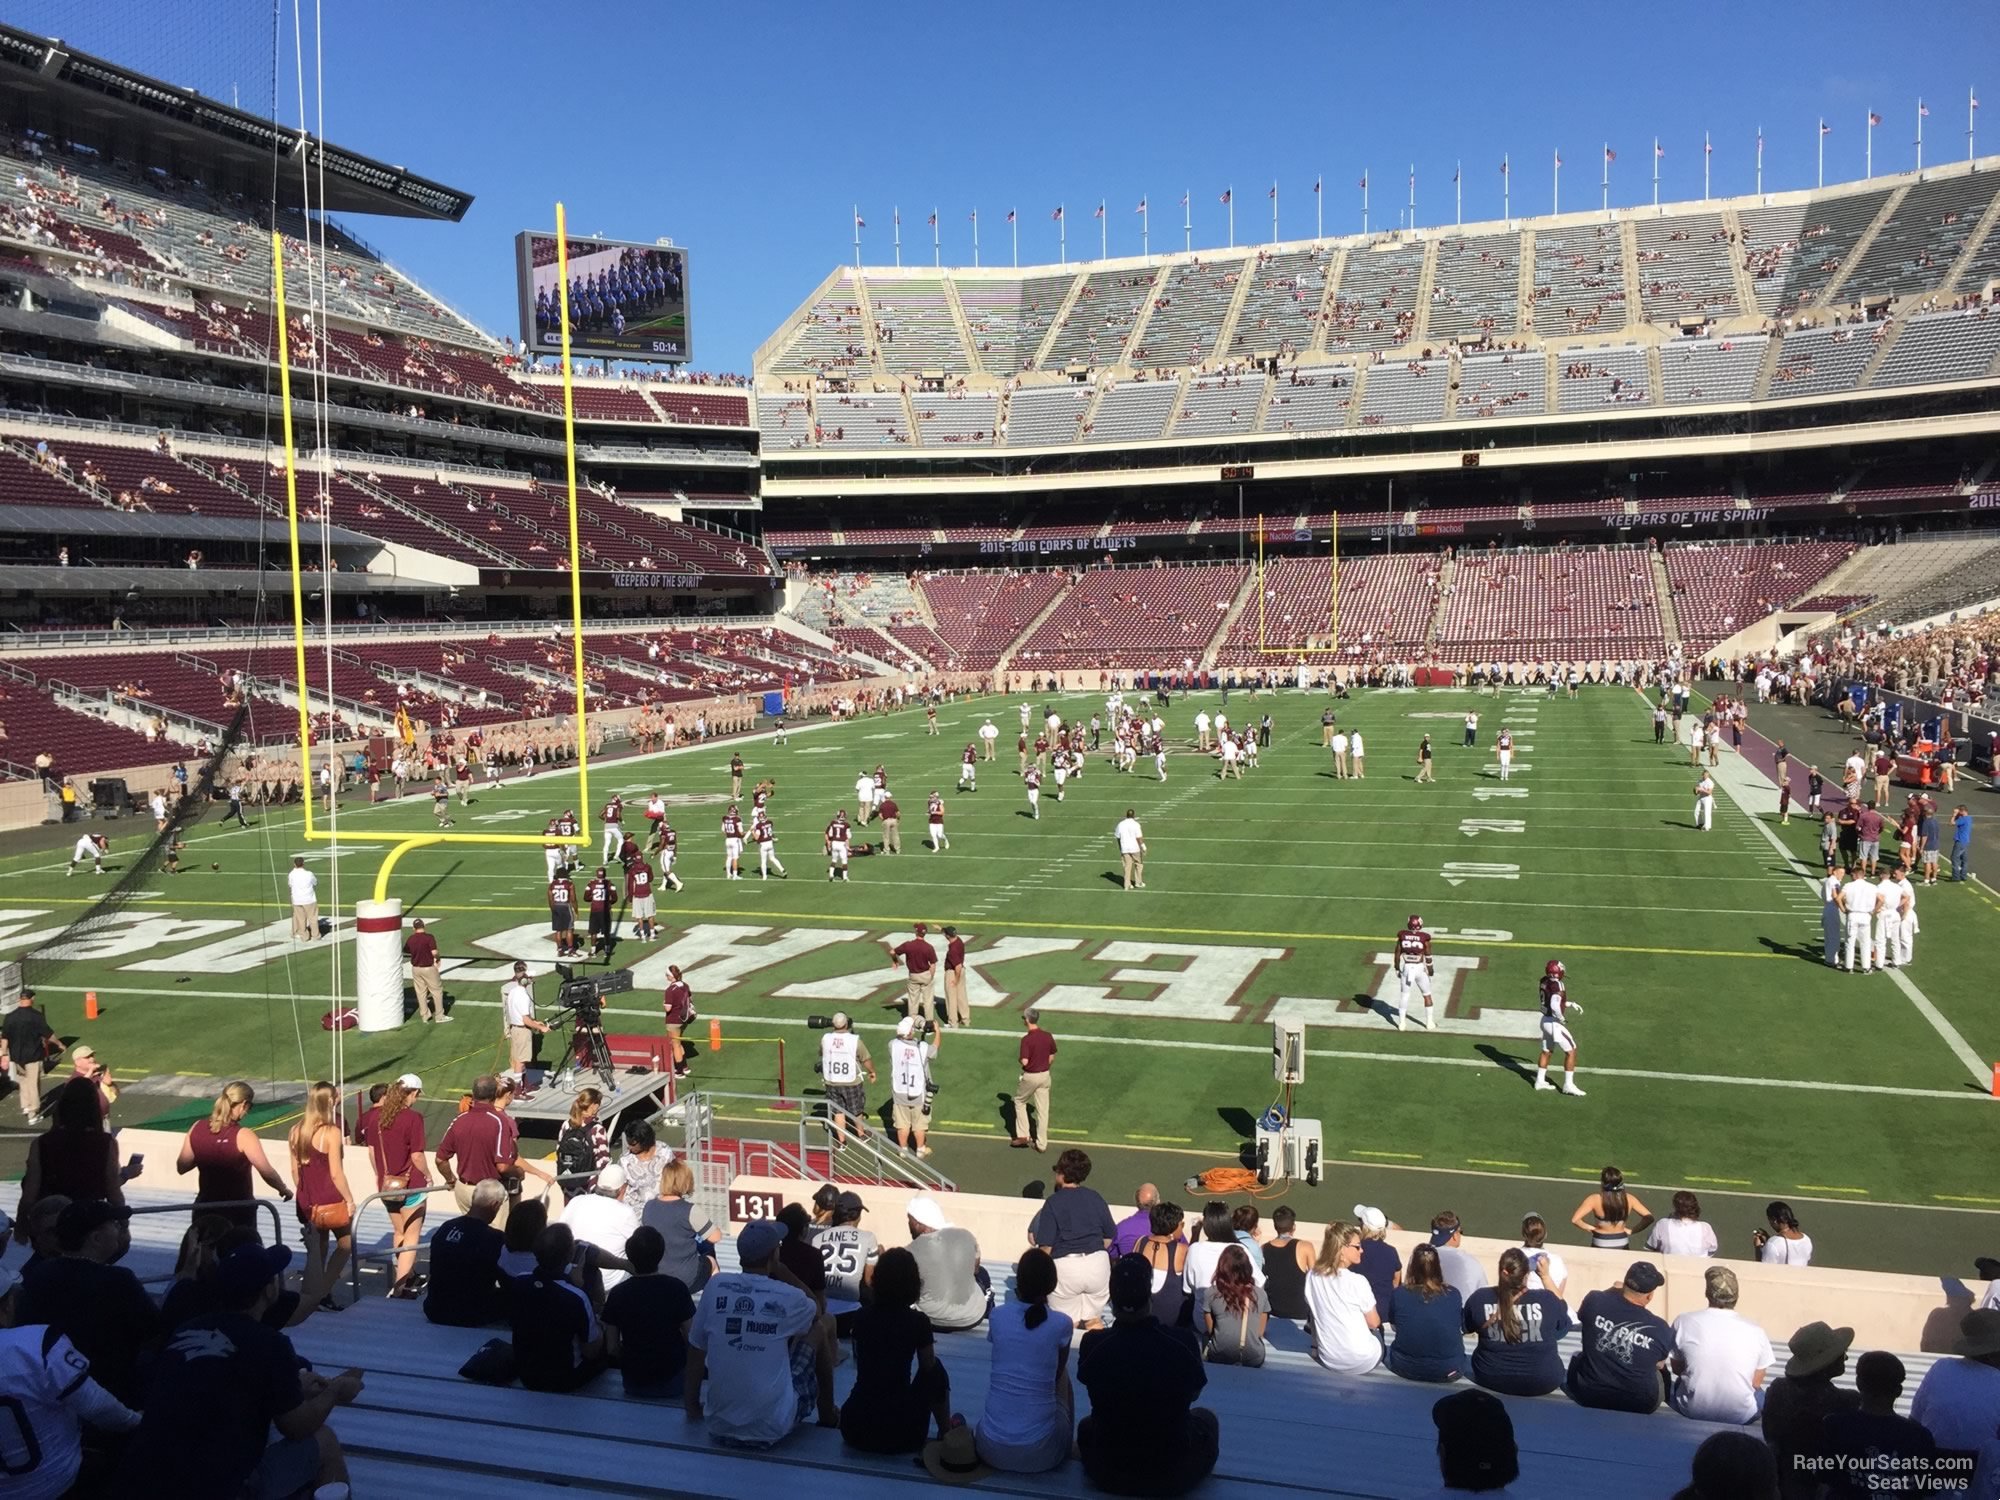 section 131, row 20 seat view  - kyle field